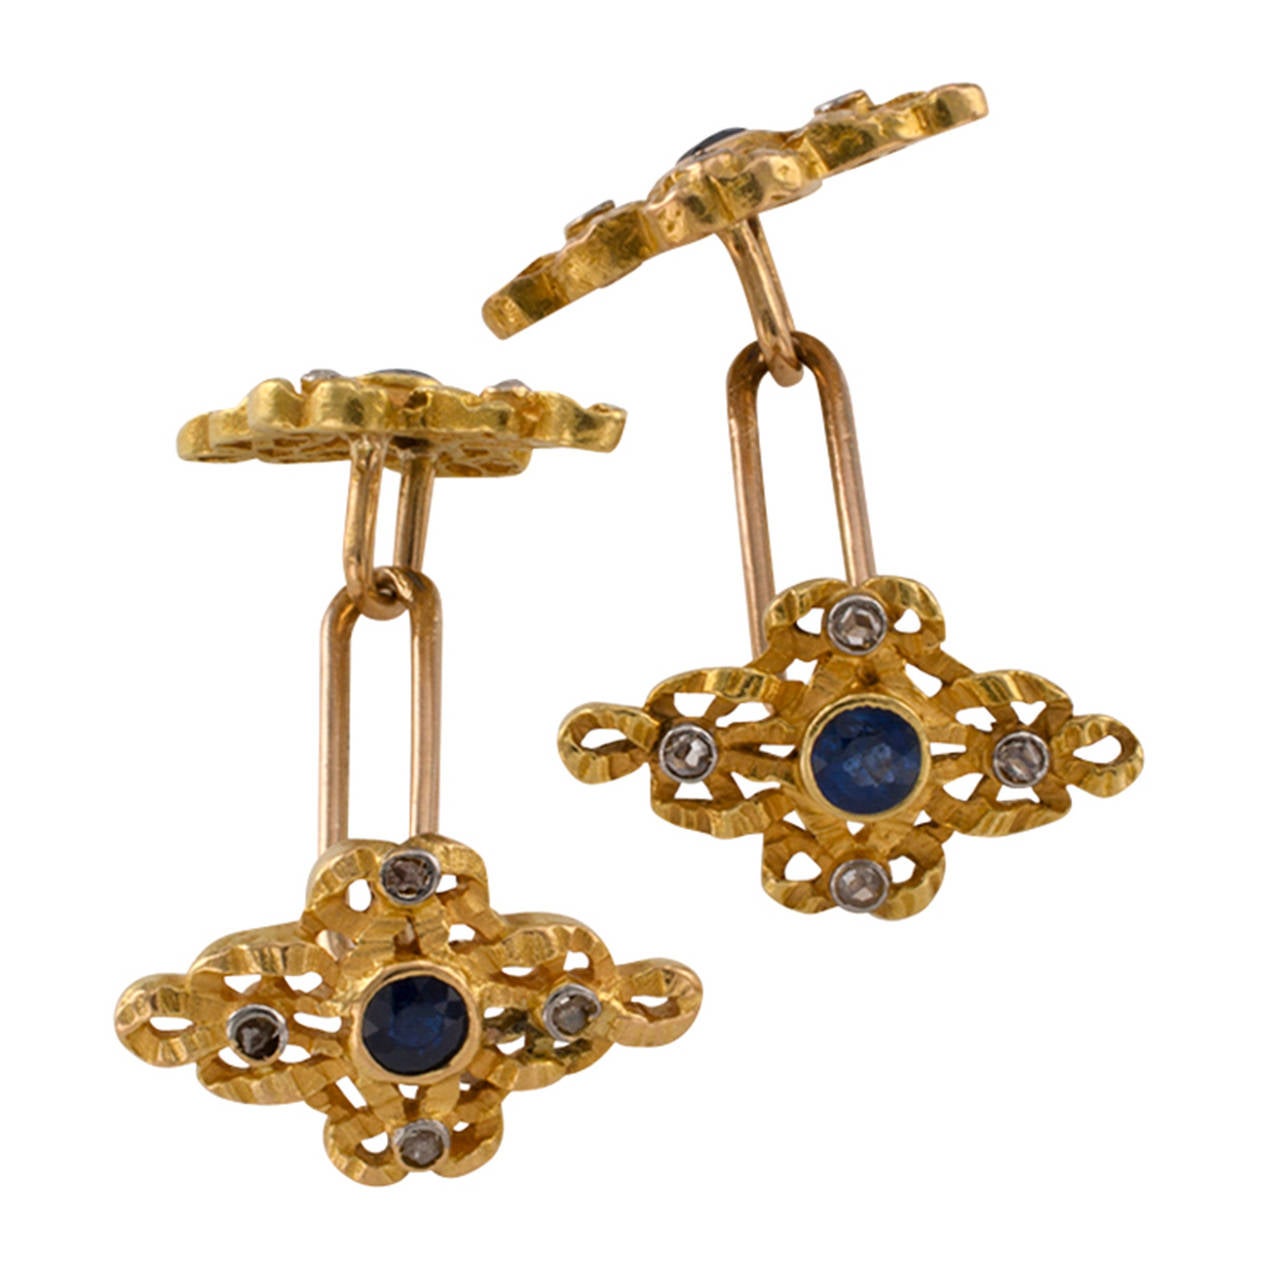 Art Nouveau Sapphire And Diamond Cuff Links

Unusual shape, these articulated, double-sided matching designs set with round sapphires and rose-cut diamonds are very striking.  Four sapphires and sixteen rose-cut diamonds, mounted in 18 karat gold,